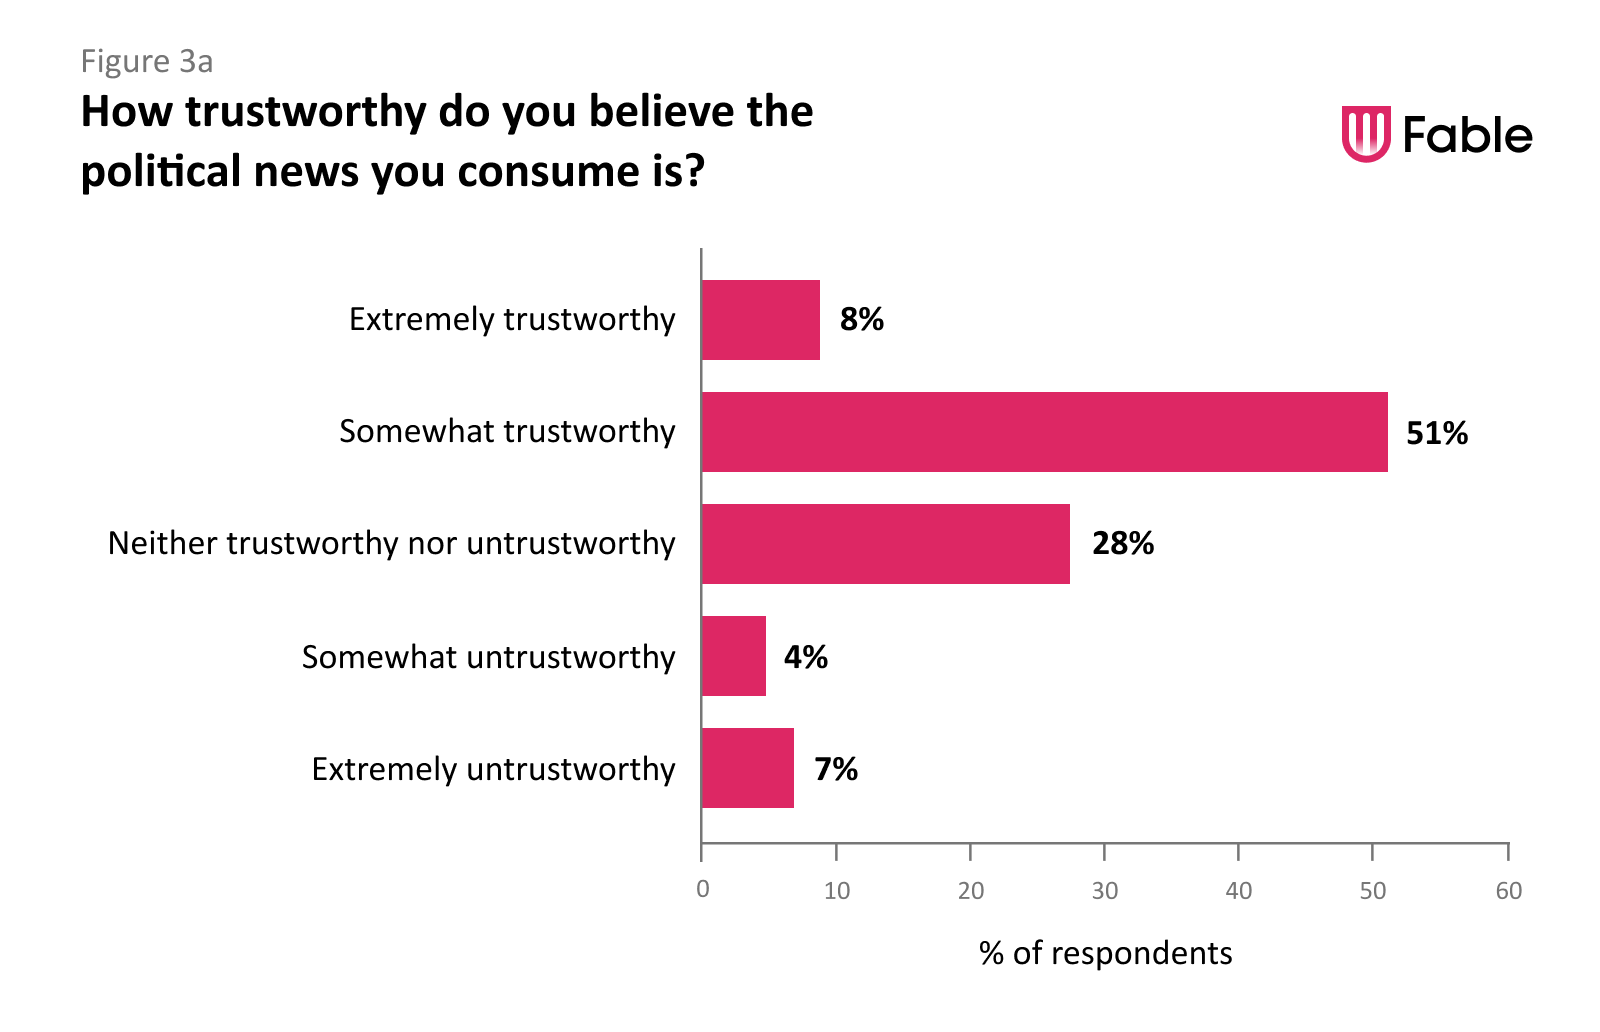 a bar-graph captioned “How trustworthy do you believe the political news you consume is?” showing the following data: Extremely trustworthy: 8% Somewhat trustworthy: 51% Neither trustworthy 'nor untrustworthy: 28% Somewhat untrustworthy: 4% Extremely untrustworthy: 7%